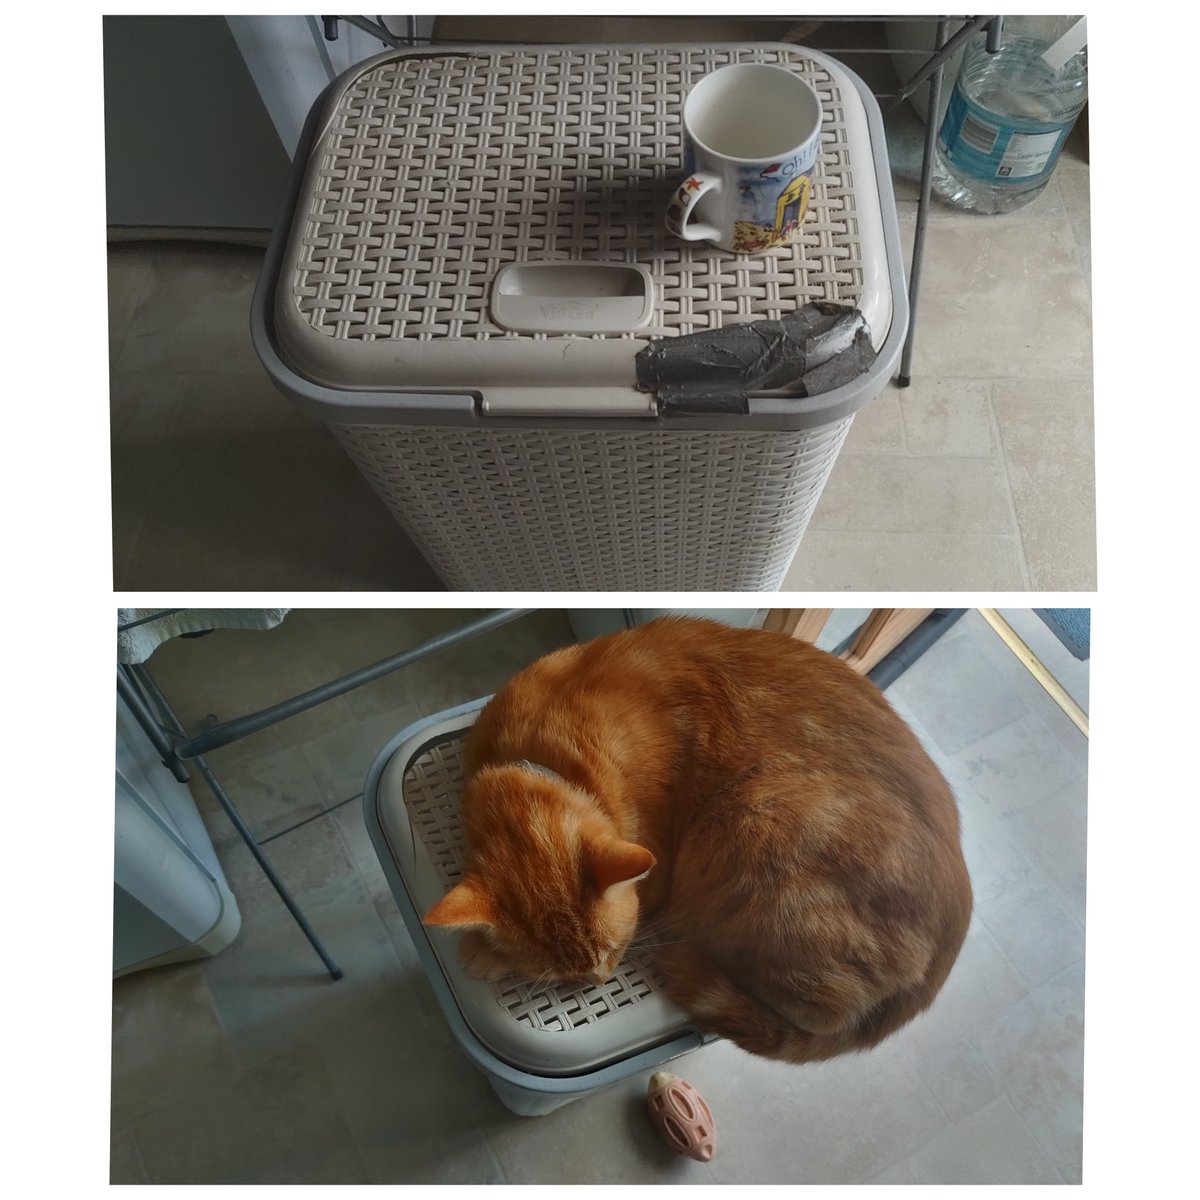 Aslan continues to grow its him that's broken the washing basket. When he lays on my chest the heavy lump affects my breathing 😂 he's not fat he's just big